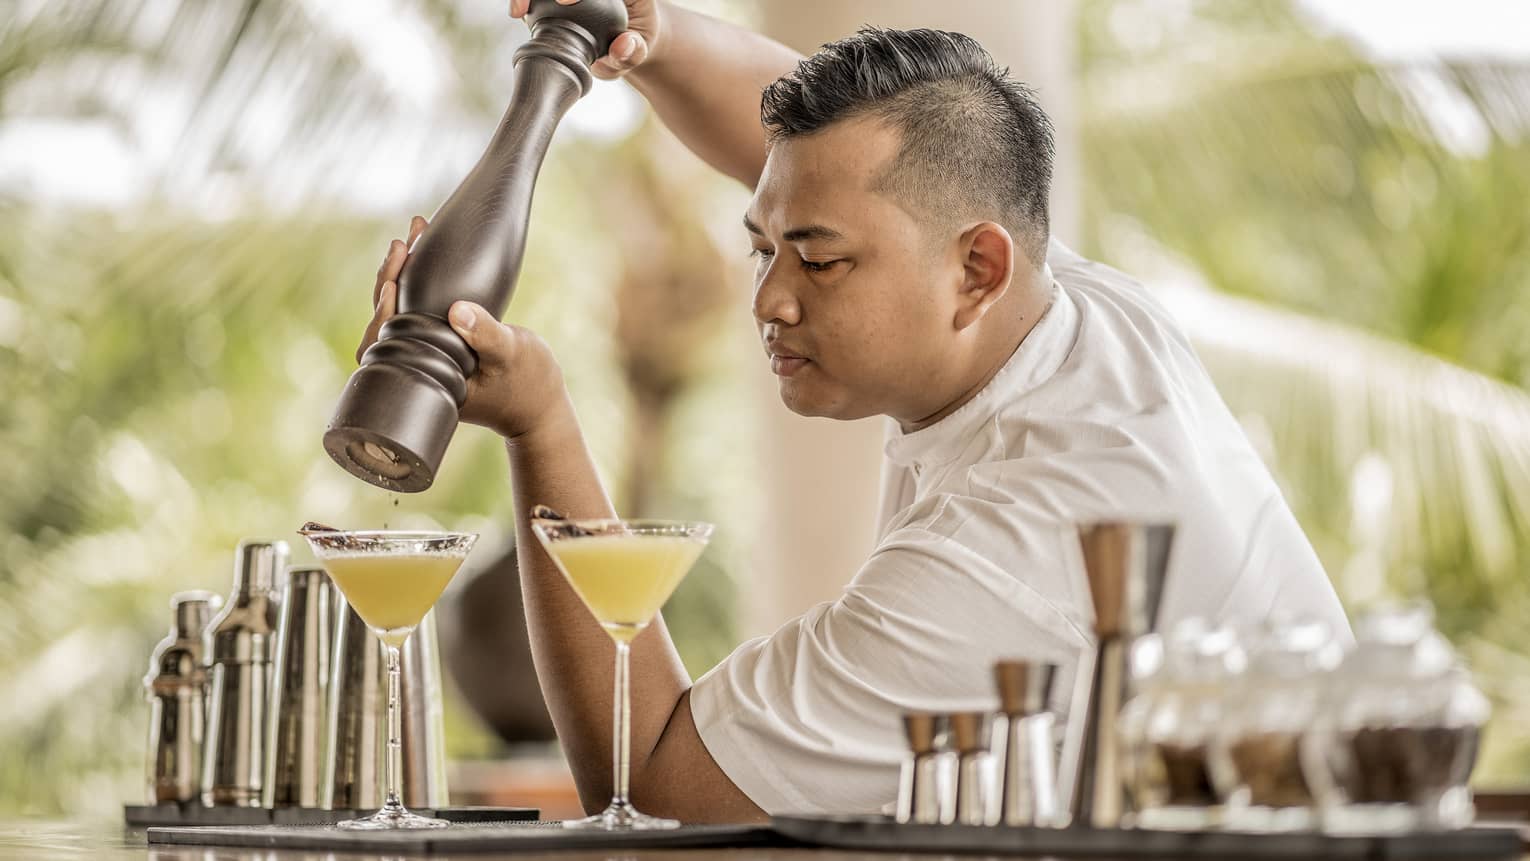 A bartender garnishing a drink with spices in Bali